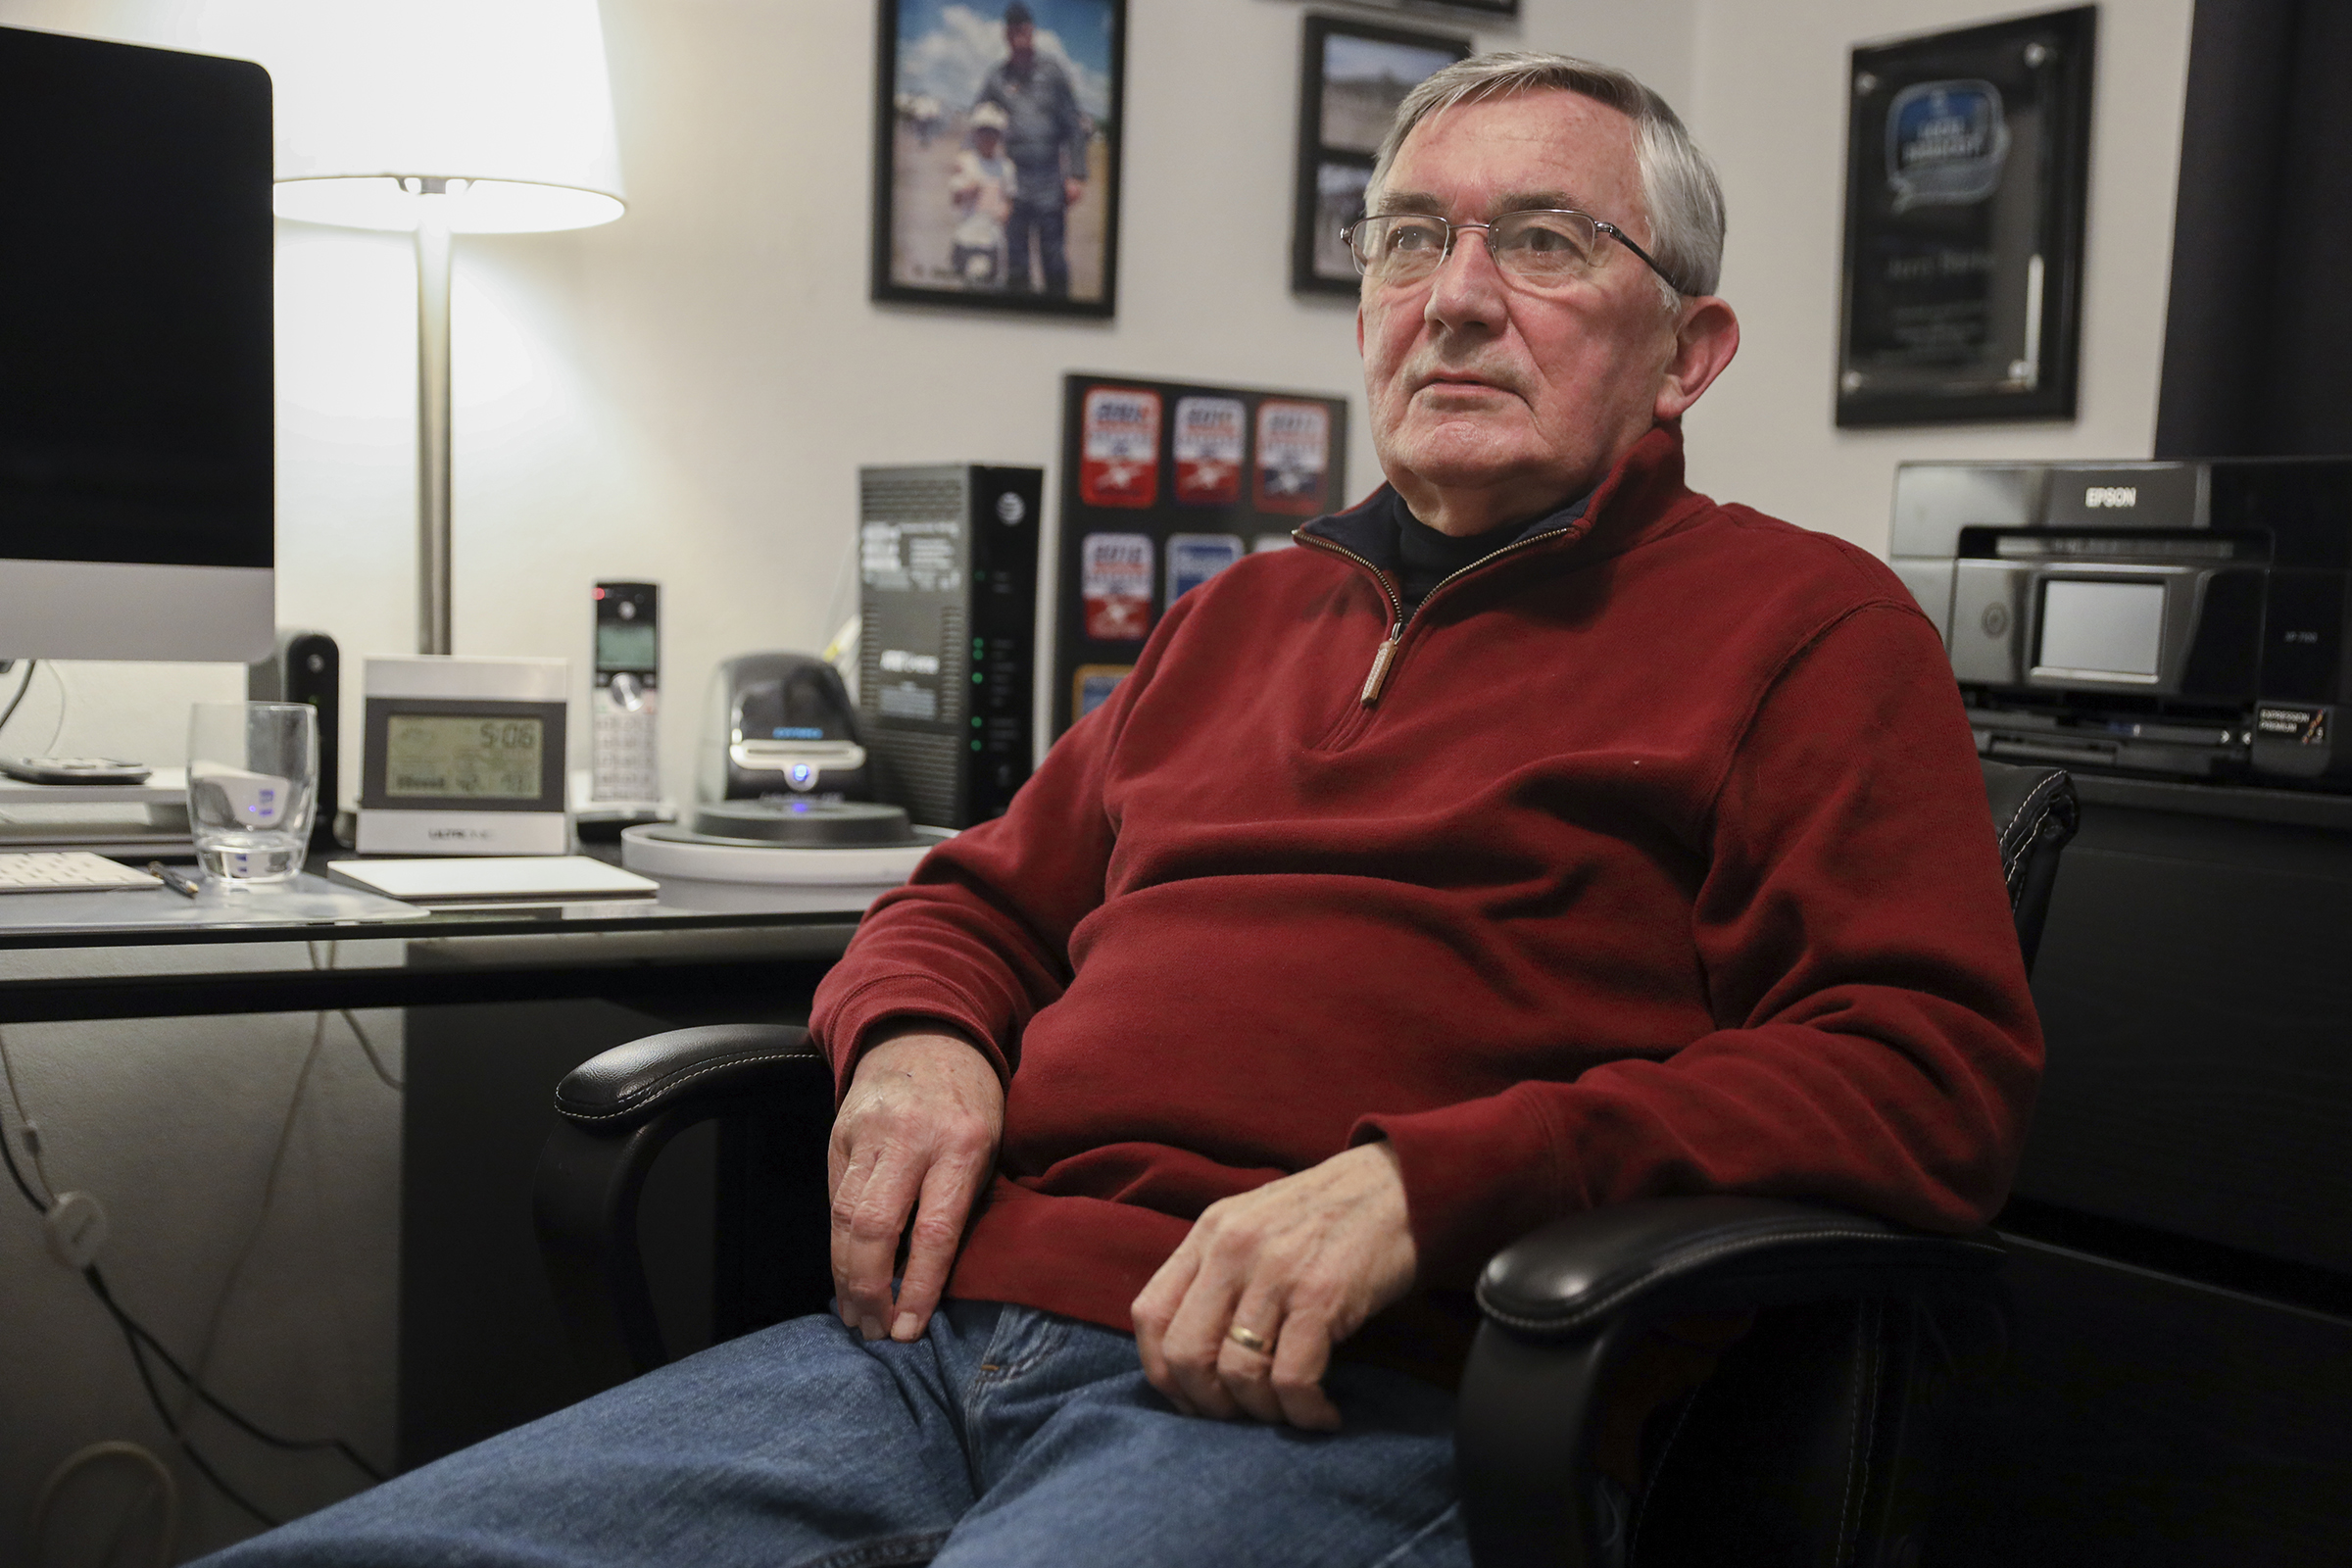 Jerry Burke sits in an office